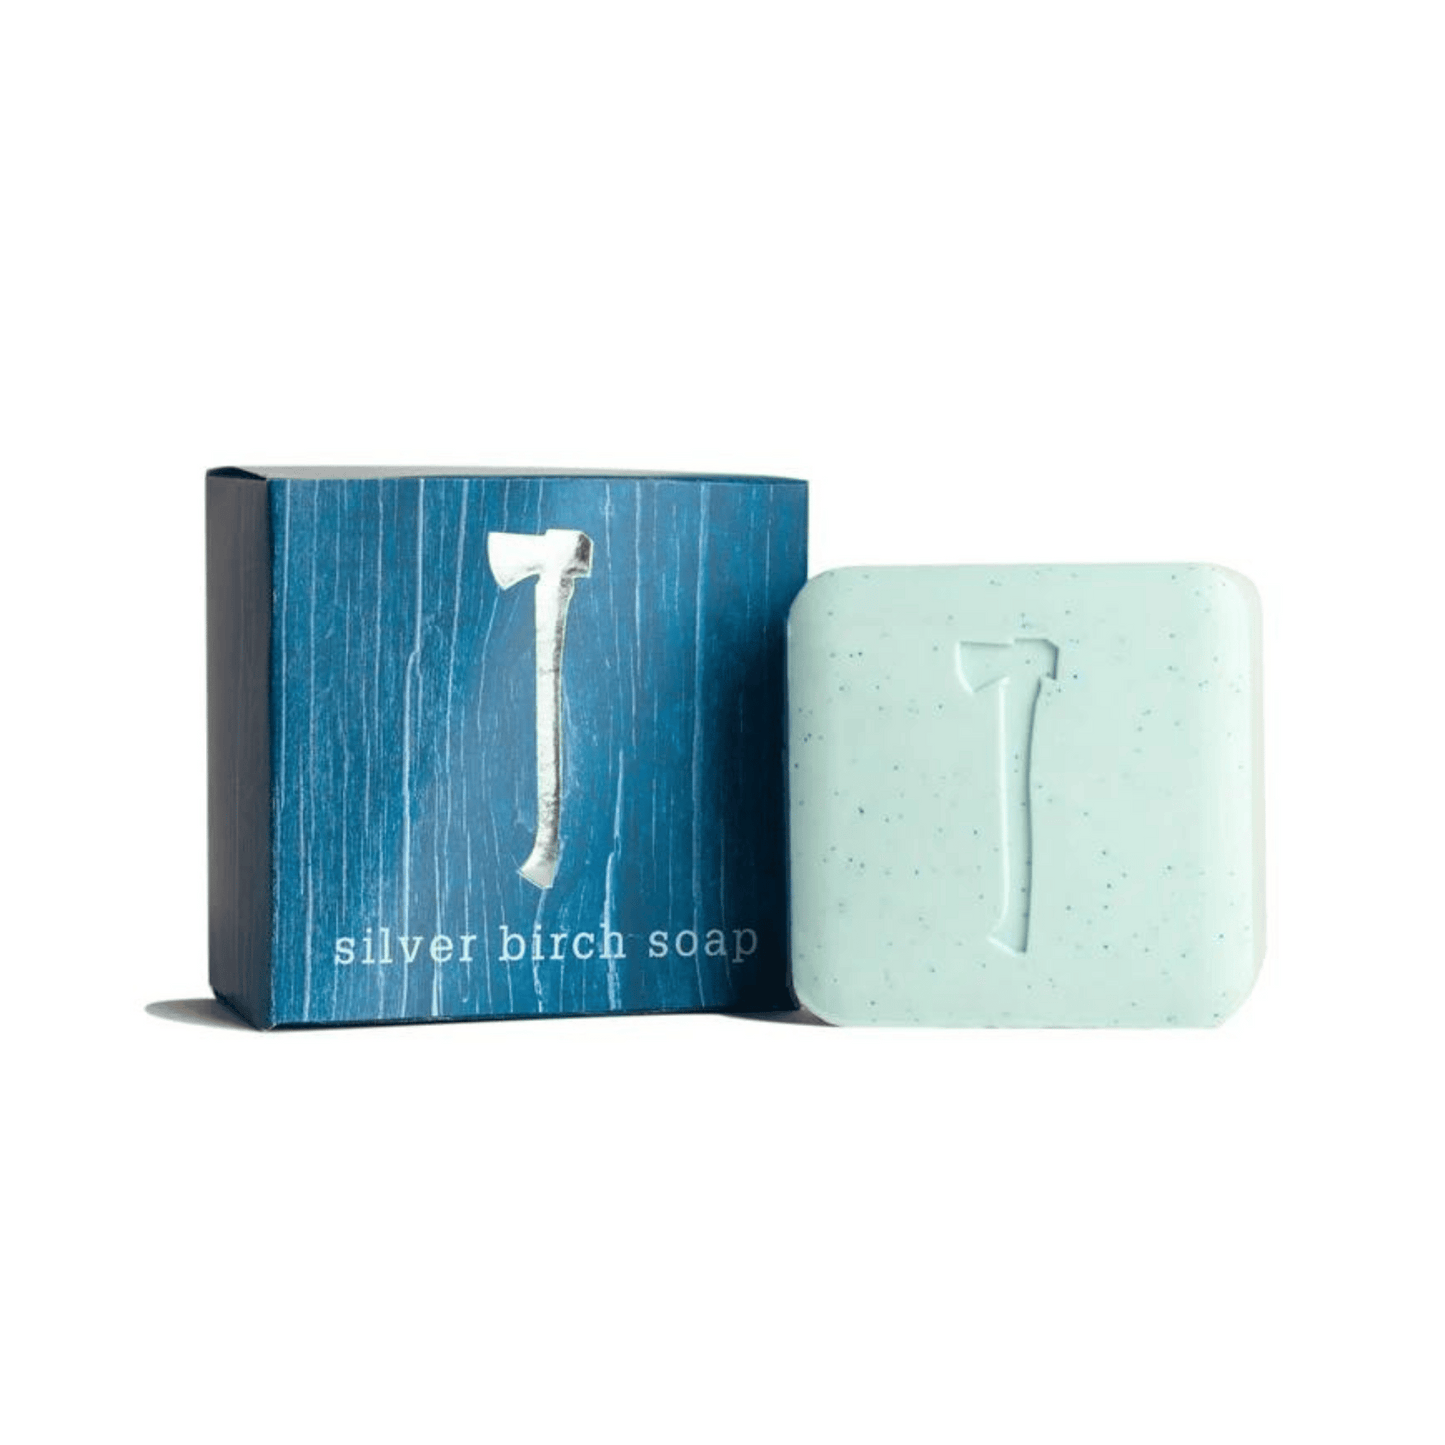 Primary Image of Silver Birch Bar Soap